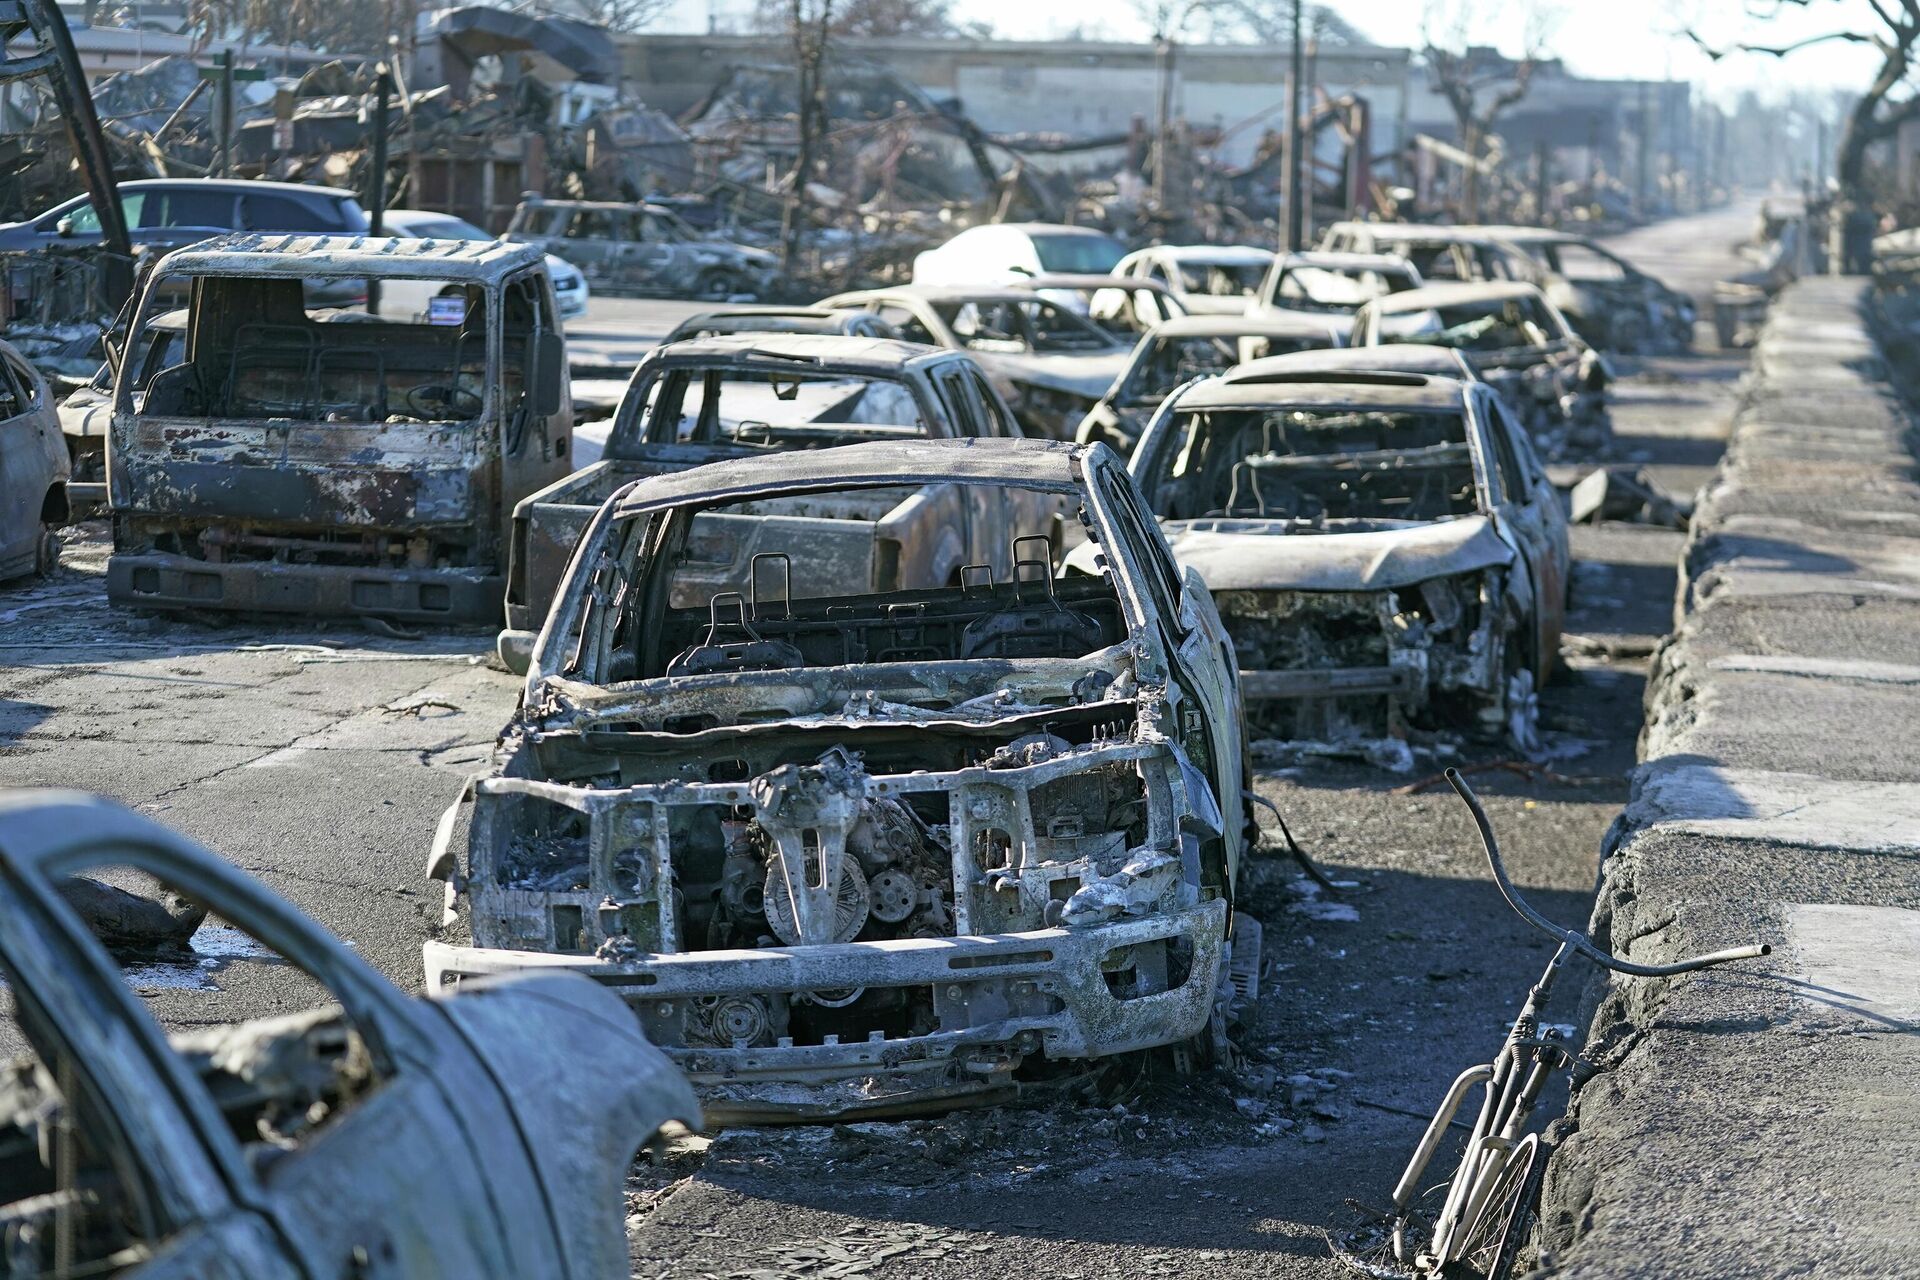 Burnt out cars line the sea walk after the wildfire on Friday, Aug. 11, 2023, in Lahaina, Hawaii. Hawaii emergency management records show no indication that warning sirens sounded before people ran for their lives from wildfires on Maui that killed multiple people and wiped out a historic town. Instead, officials sent alerts to mobile phones, televisions and radio stations — but widespread power and cellular outages may have limited their reach.  - Sputnik International, 1920, 15.08.2023